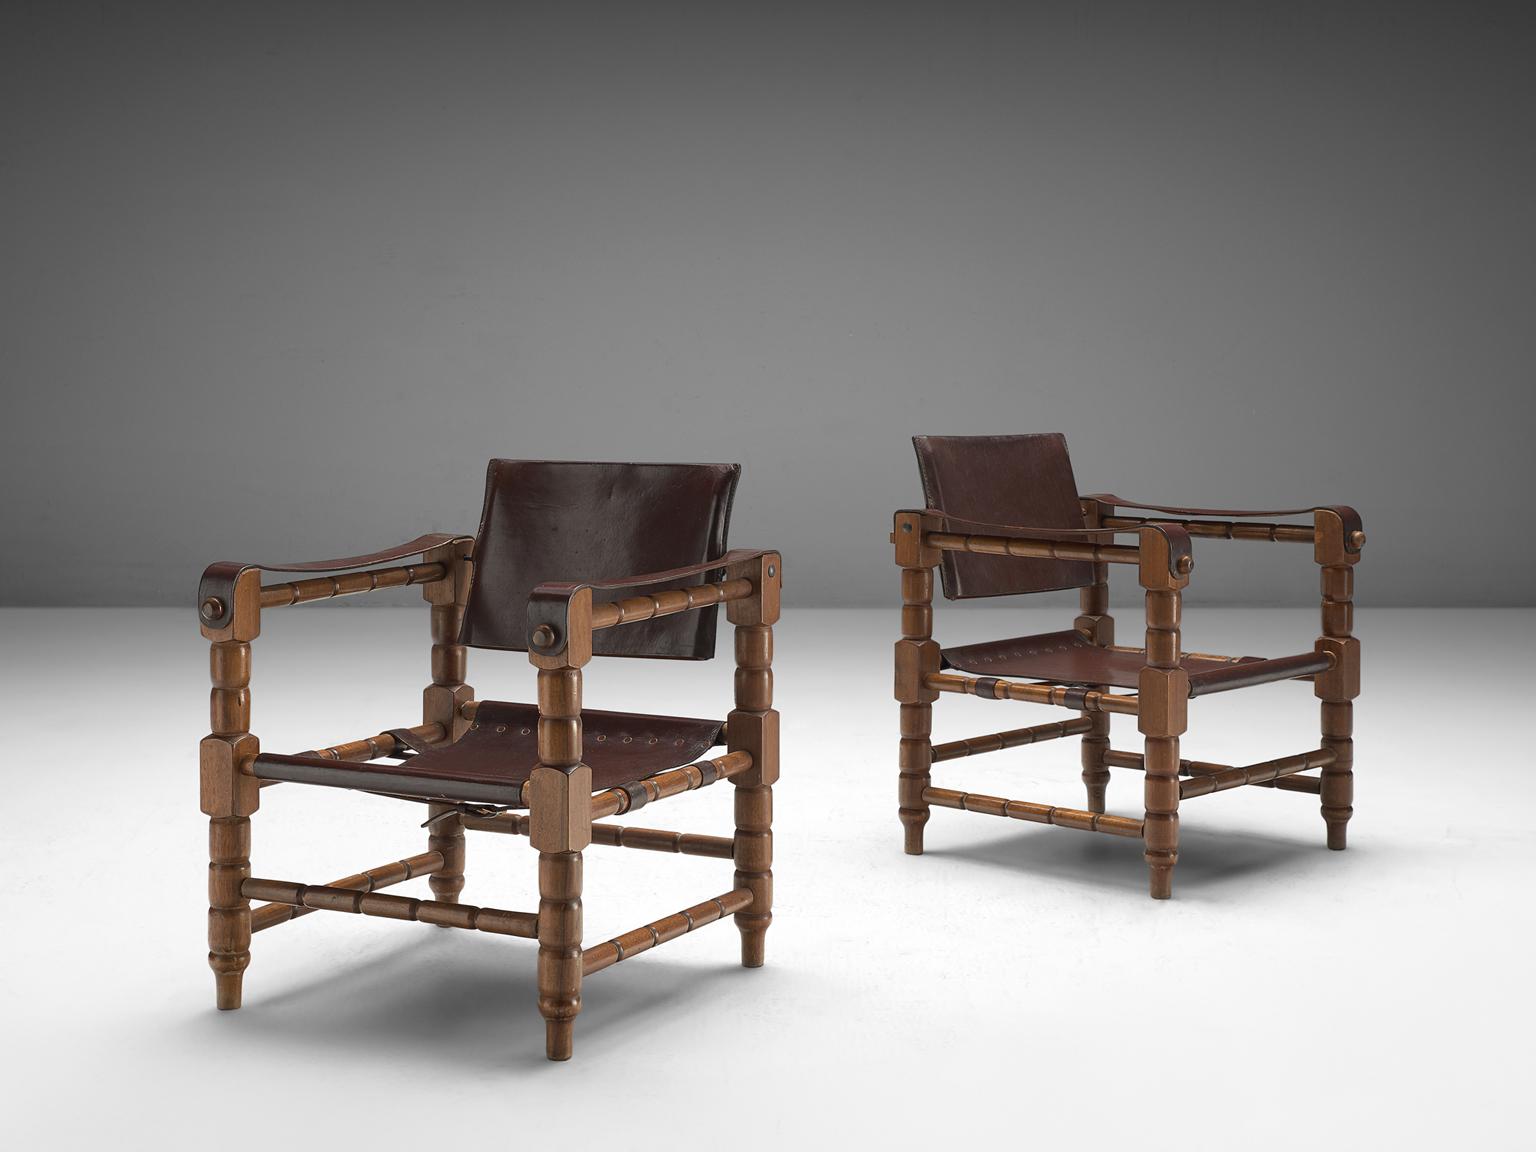 Safari chair, beech and leather, Europe, 1940s

Robust yet stately safari chairs with a rich patina. These chairs feature wonderfully carved wooden frames, with sculpted forms. The frame holds the leather straps that function as armrests and the